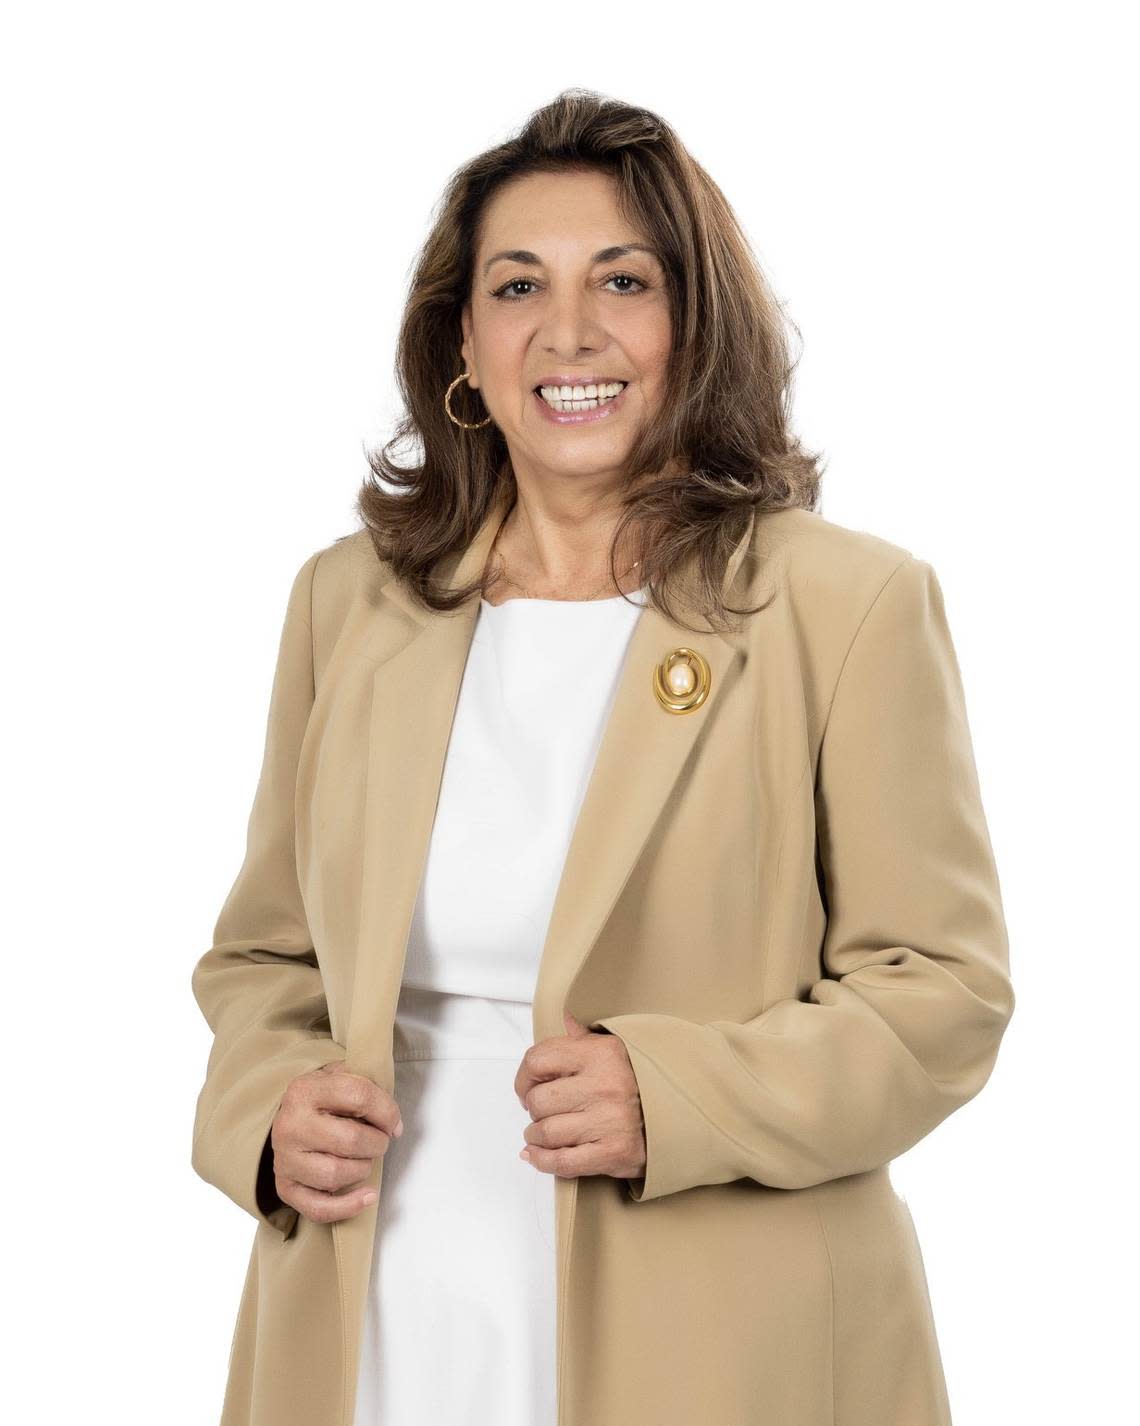 Susan Khoury is a Democratic candidate for Miami-Dade County sheriff in 2024.